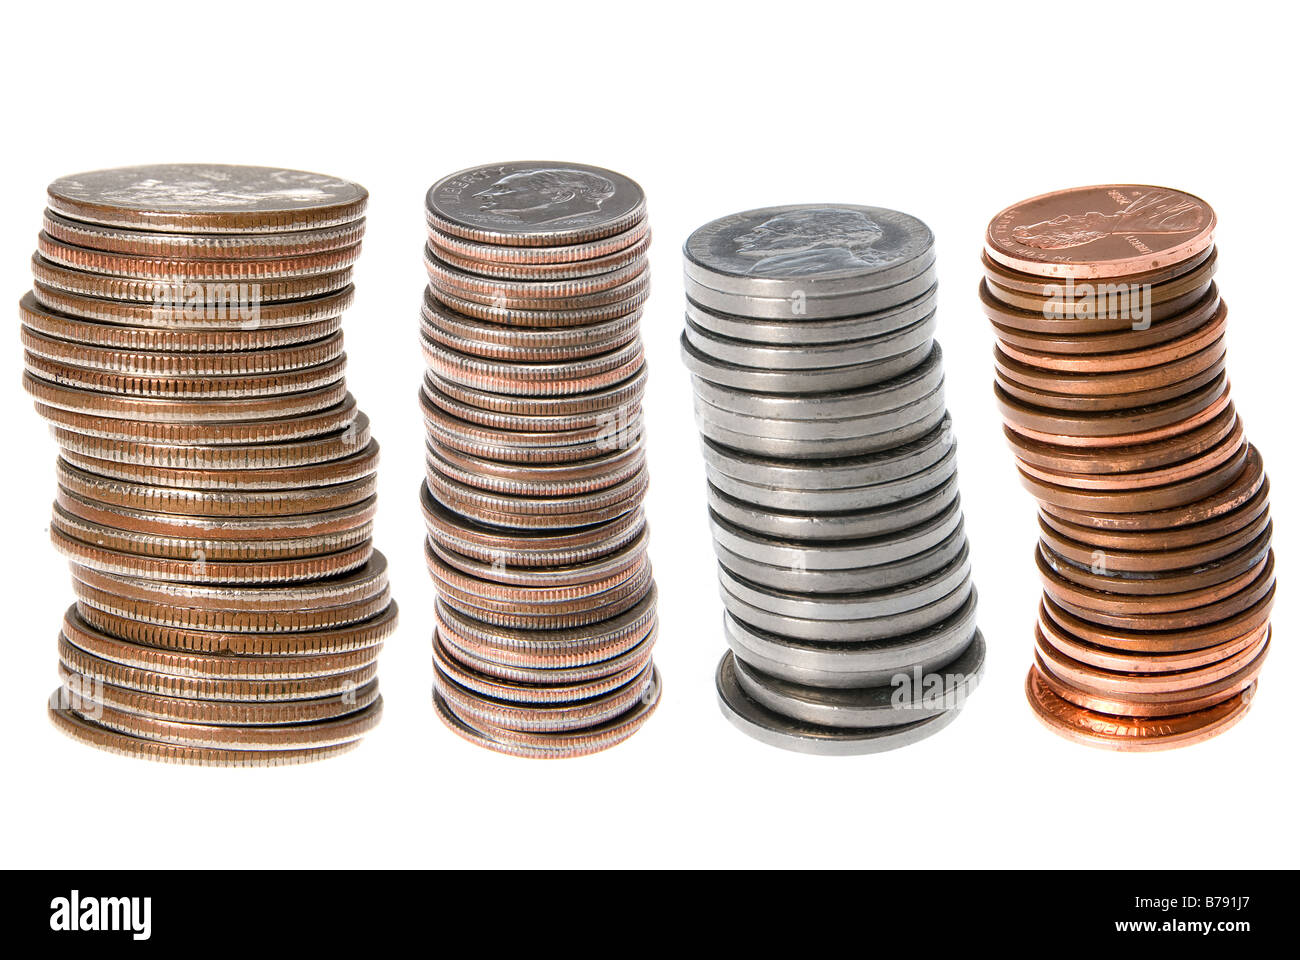 Stacks of U S currency coins including quarters dimes nickels and pennies Stock Photo